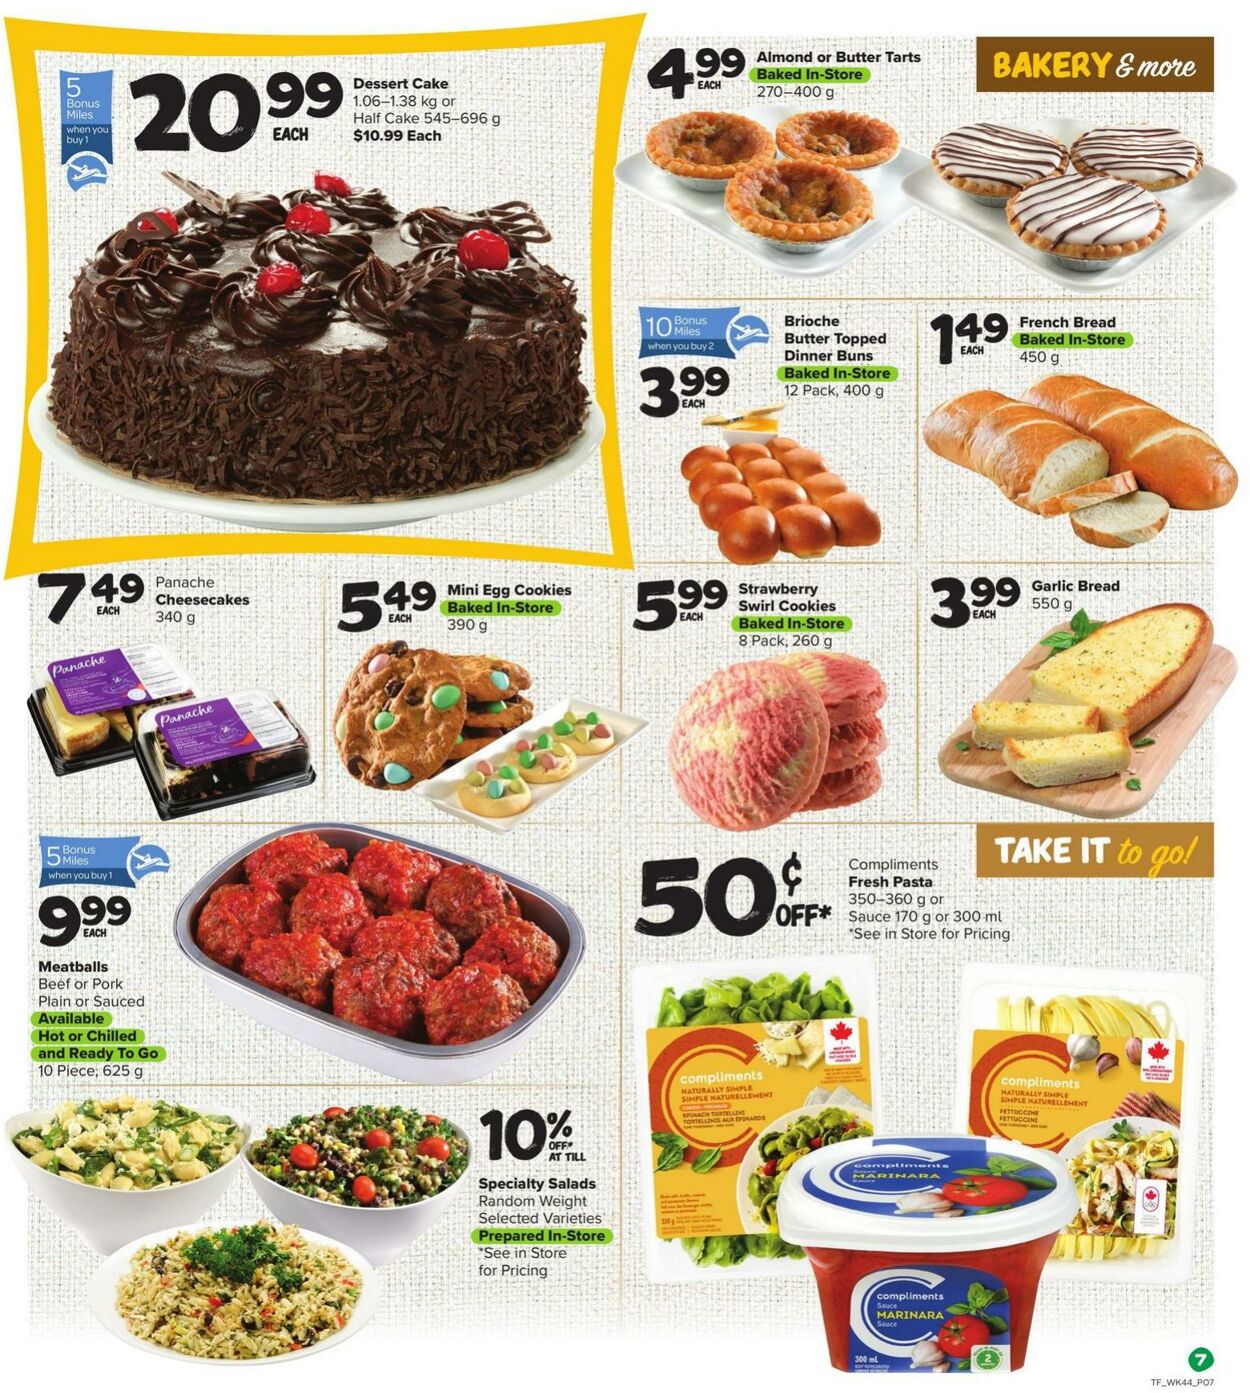 Circulaire Thrifty Foods 02.03.2023 - 08.03.2023